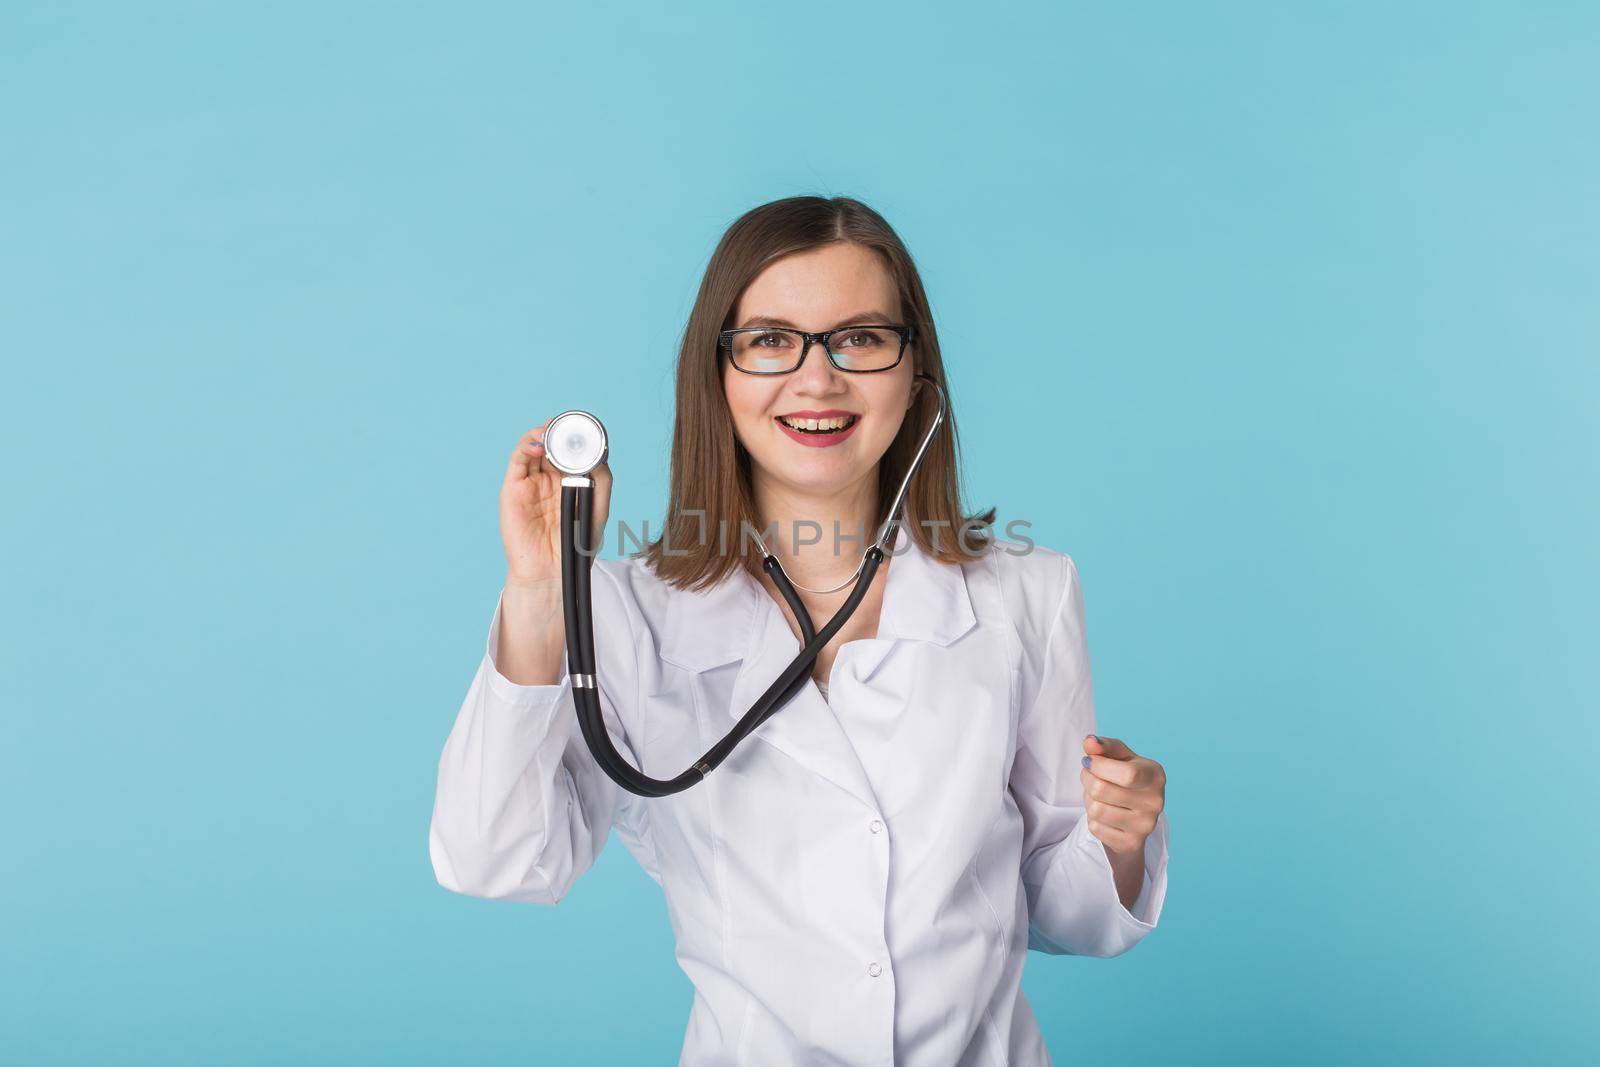 Doctor with stethoscope over blue background by Satura86